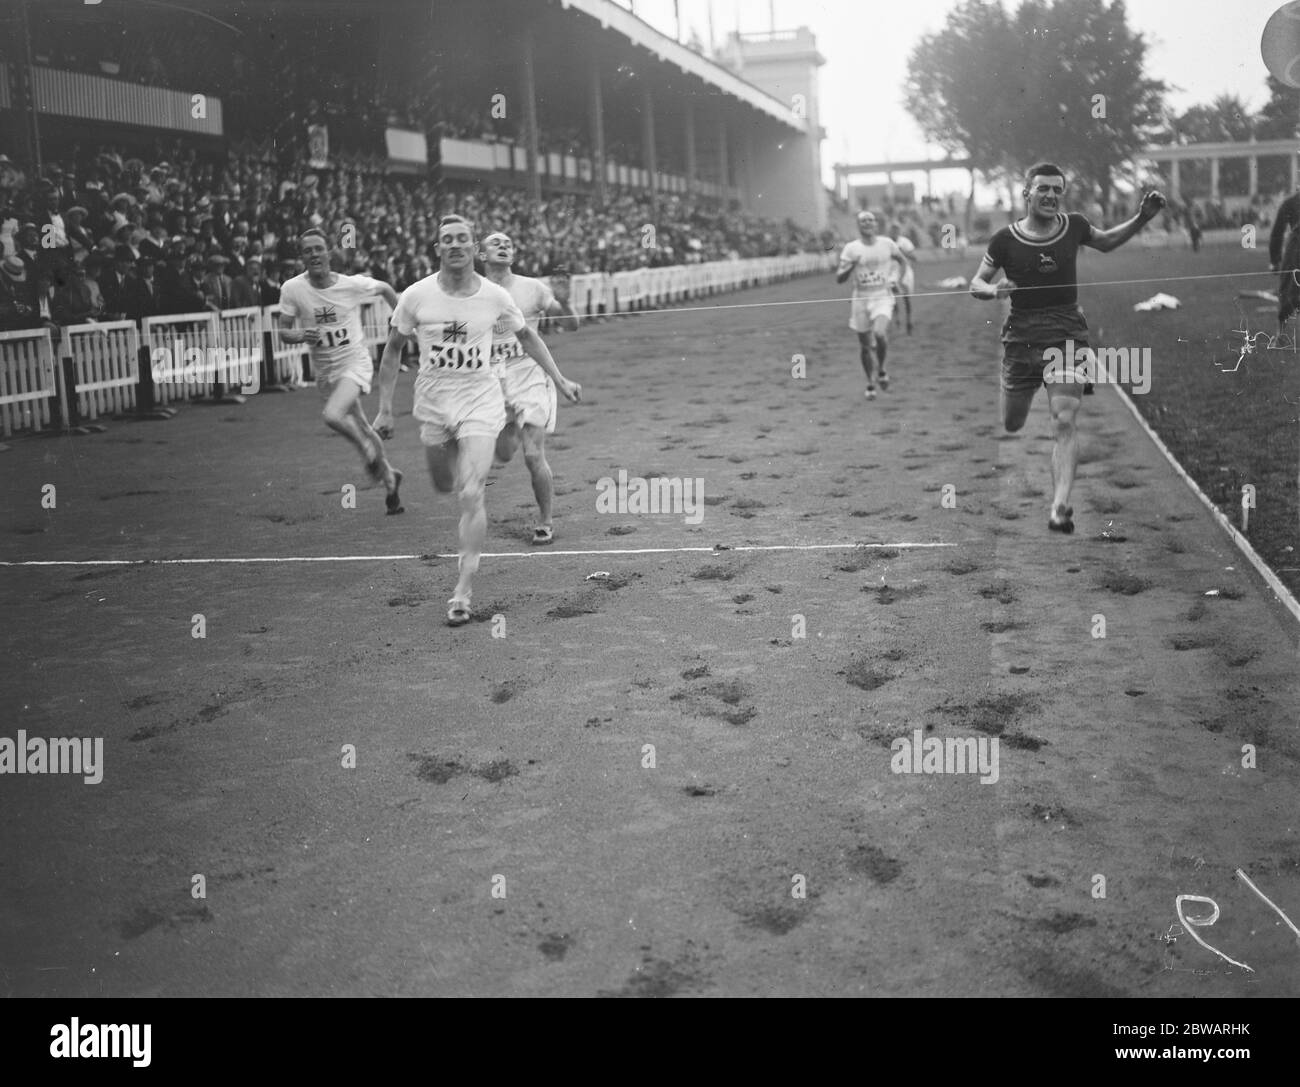 Olympic Games at Antwerp Albert Hill ( Great Britain ) great victory in the 800 metres flat race final winning by two metres in 1:53.4 18 August 1920 Stock Photo